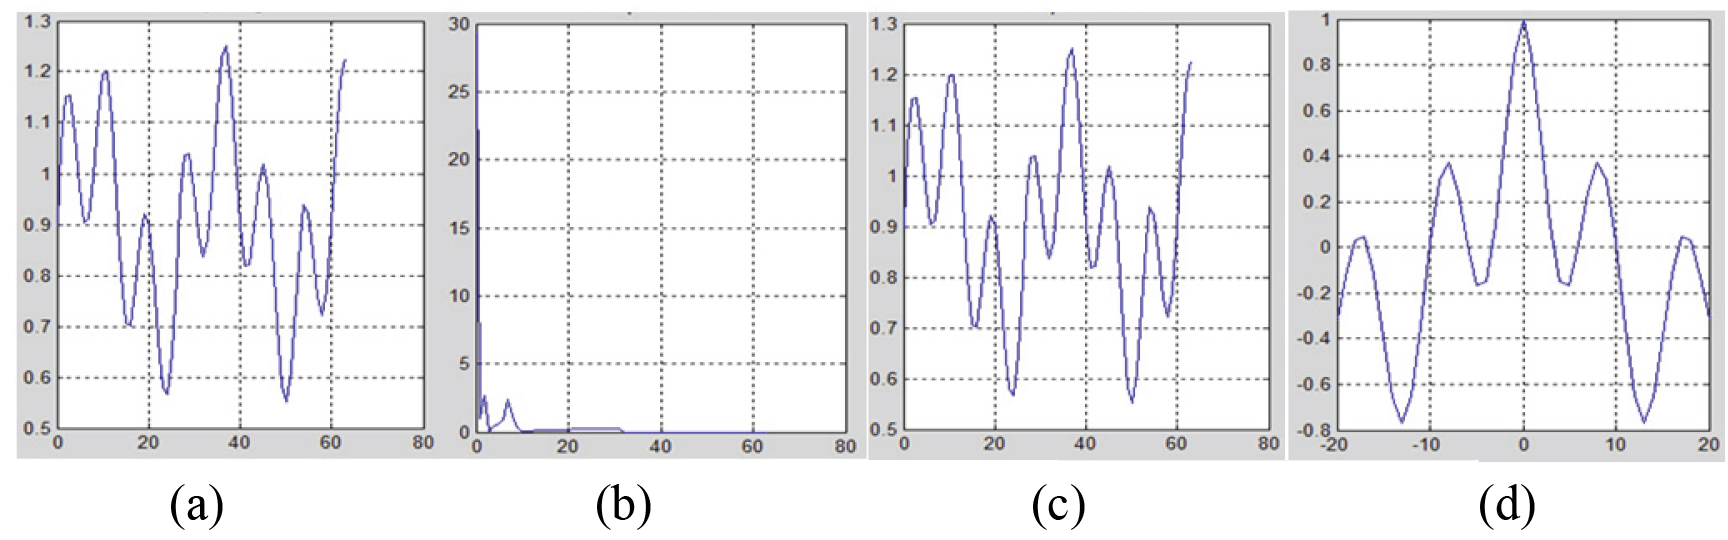 Simulation results obtained using the proposed FFT method: (a) input signal, (b) FFT results obtained using the proposed method, (c) IFFT results obtained- using the proposed method, and (d) cross correlation with input signal and IFFT results obtained using the proposed method.